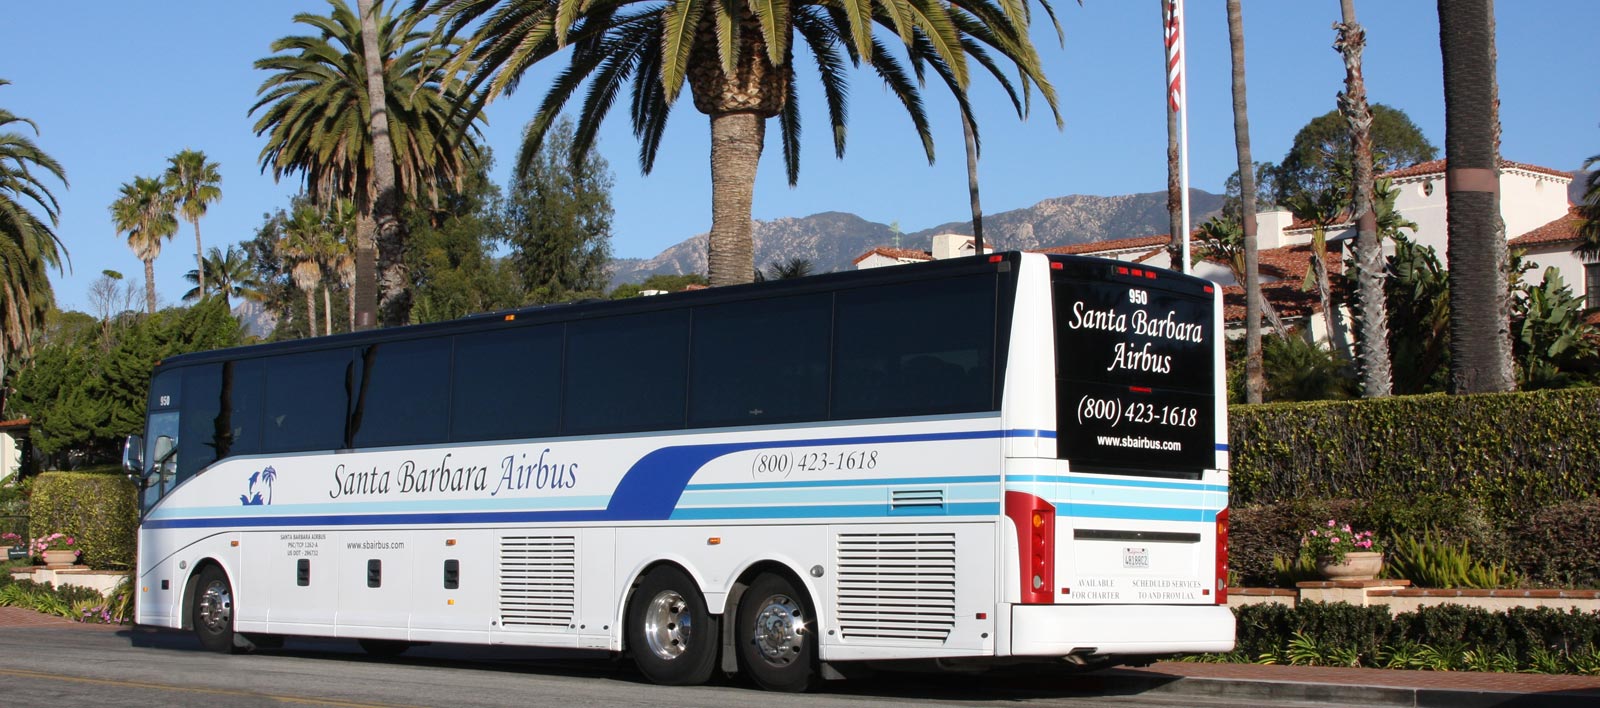 The Santa Barbara Airbus parked in front of the Biltmore hotel near Butterfly Beach.